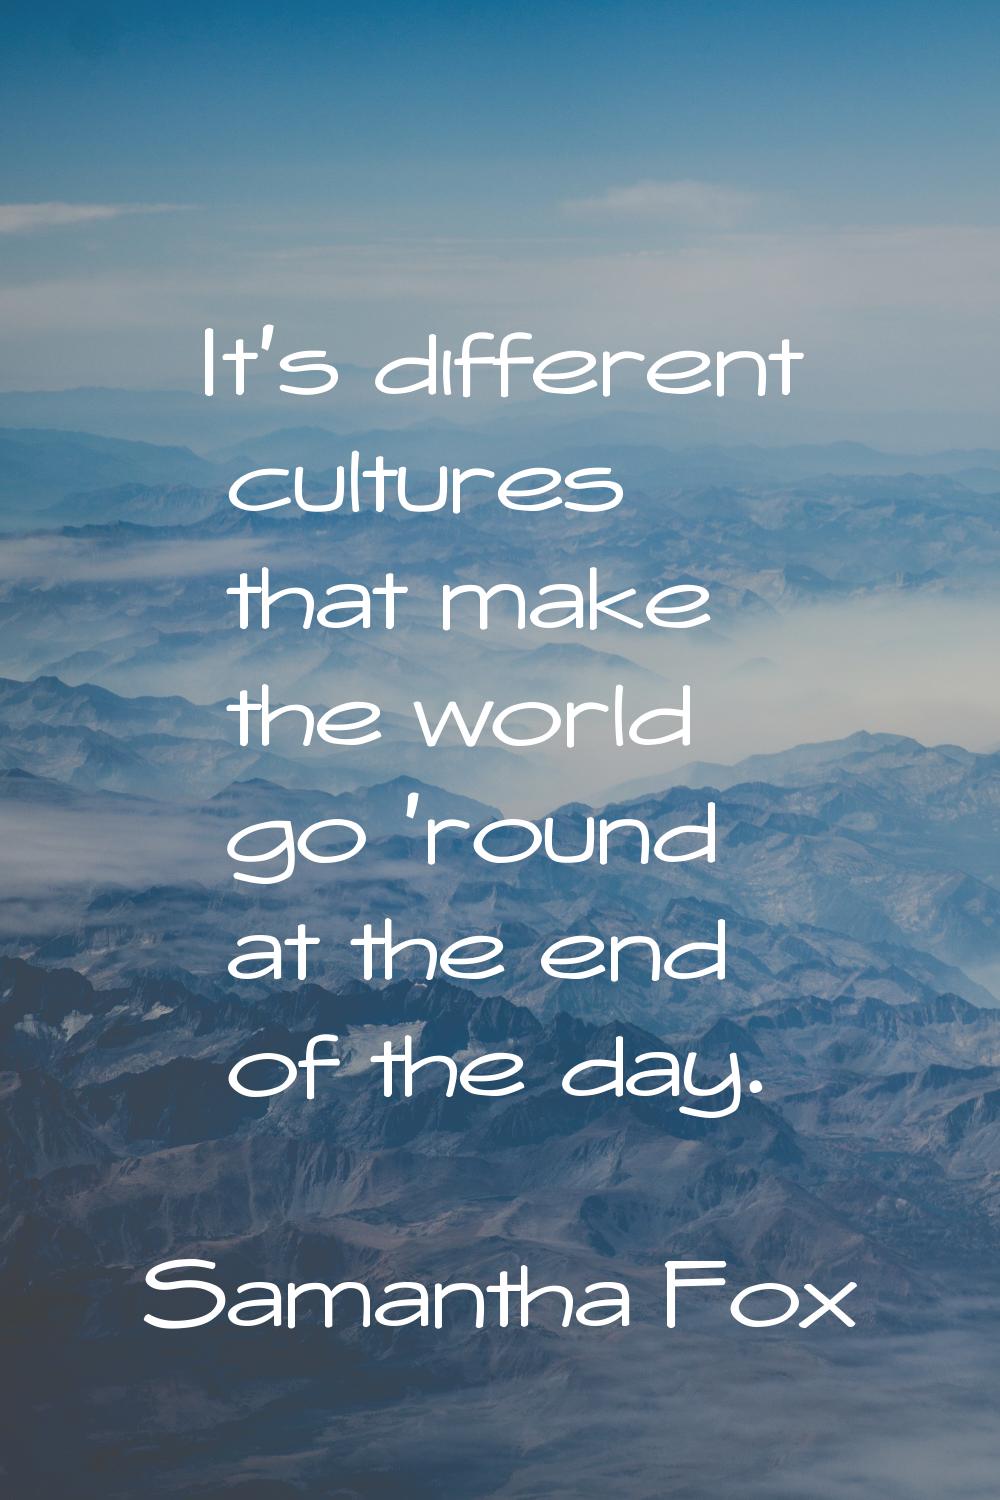 It's different cultures that make the world go 'round at the end of the day.